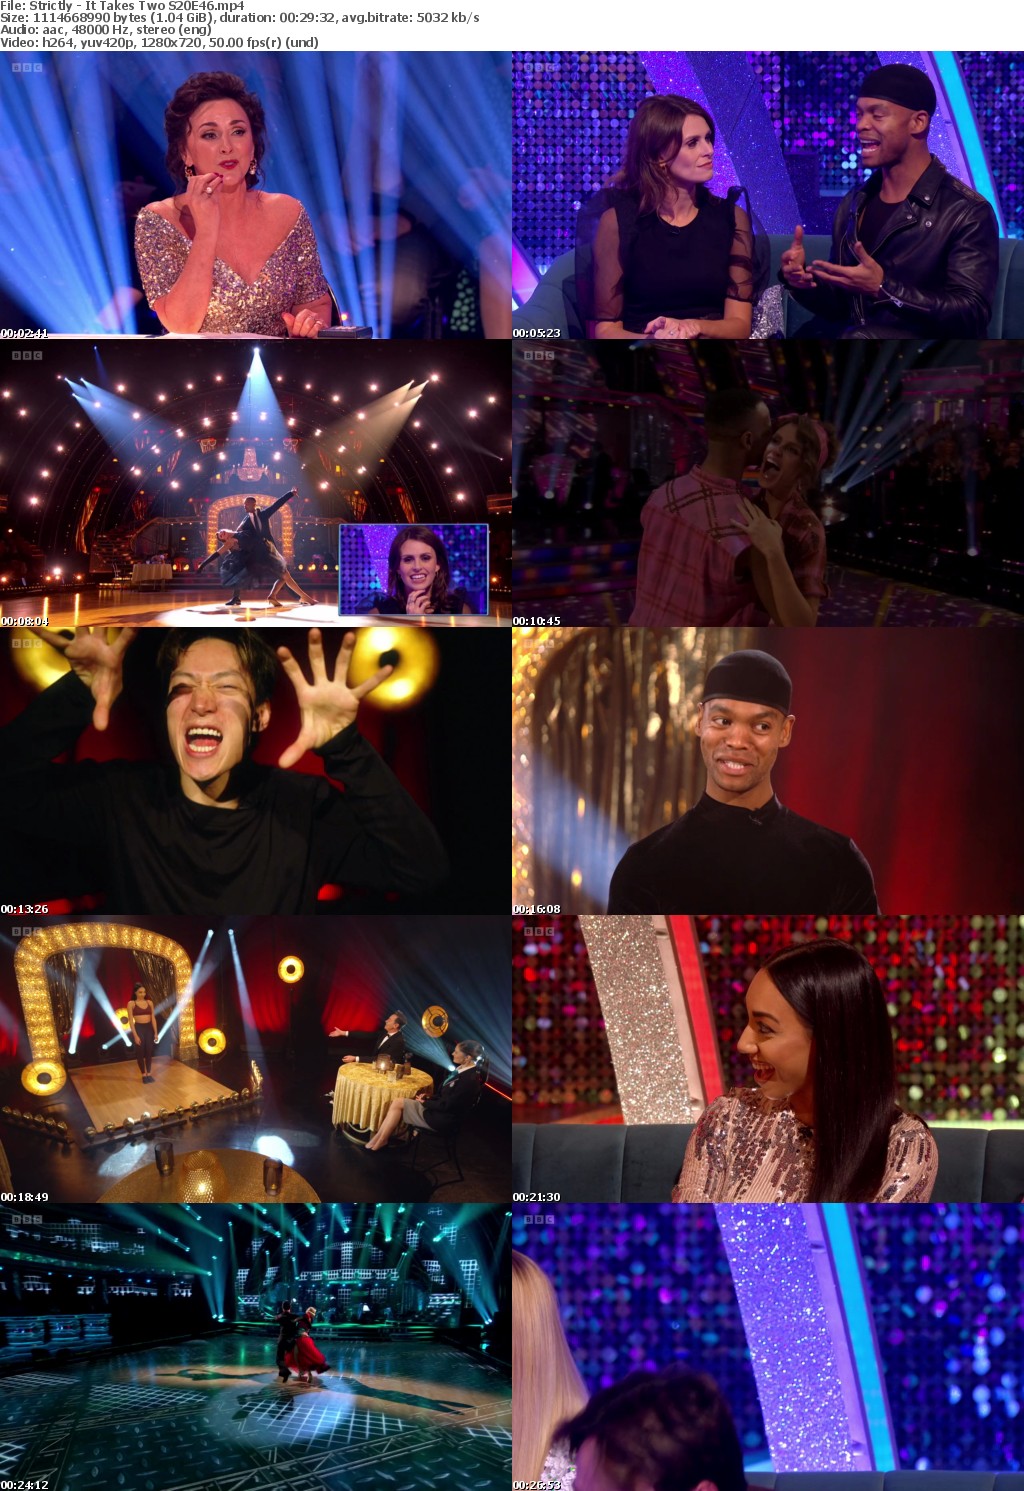 Strictly - It Takes Two S20E46 (1280x720p HD, 50fps, soft Eng subs)